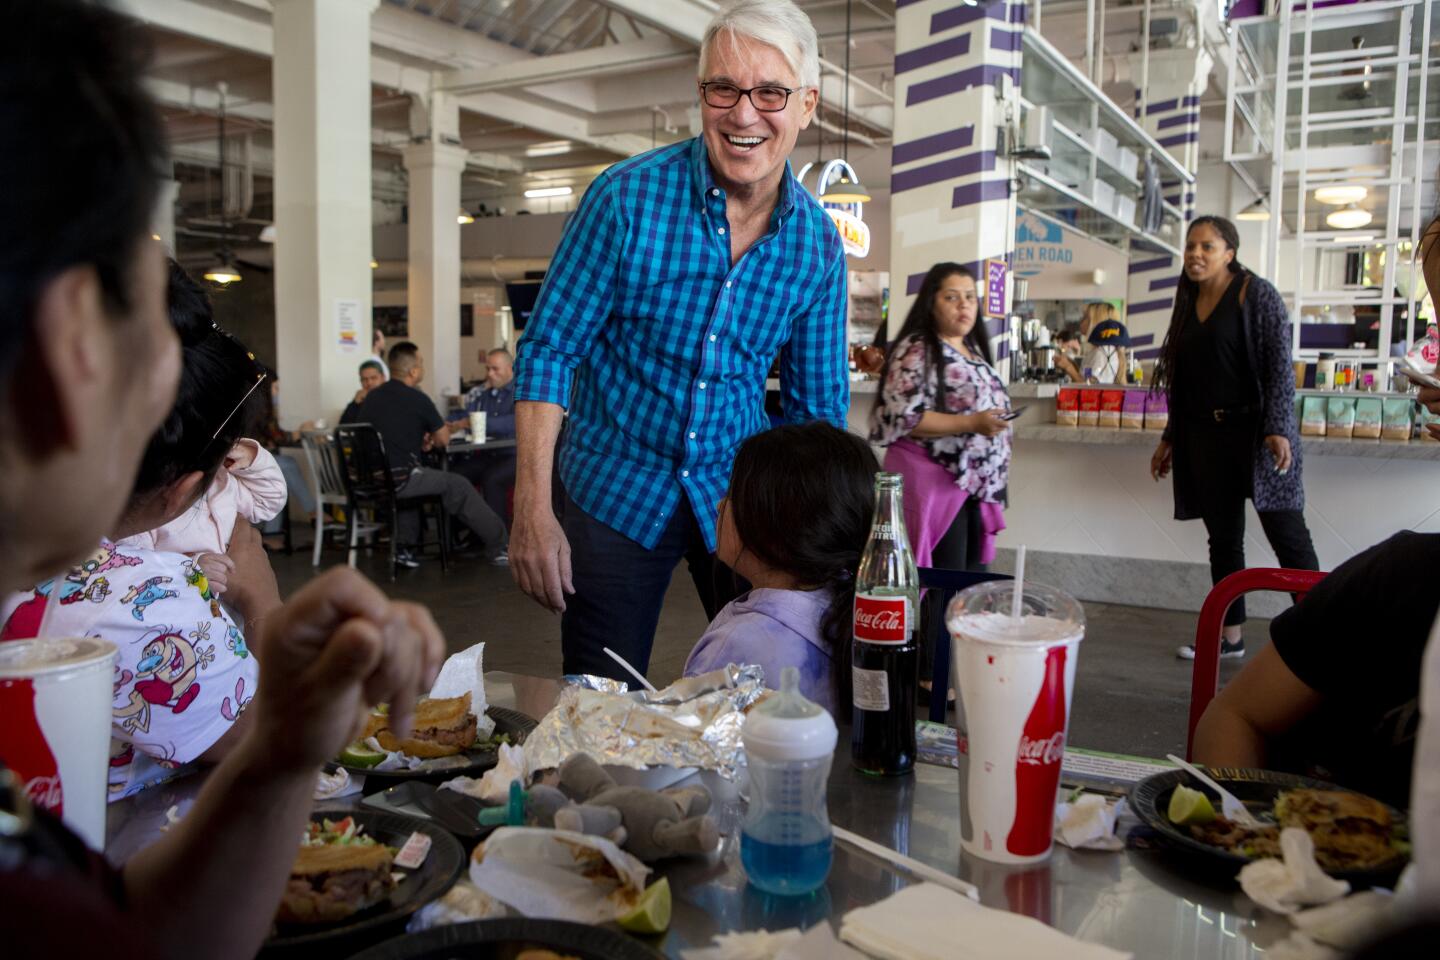 George Gascon, candidate for Los Angeles County district attorney, greets a family at Grand Central Market during lunch hour in downtown Los Angeles.